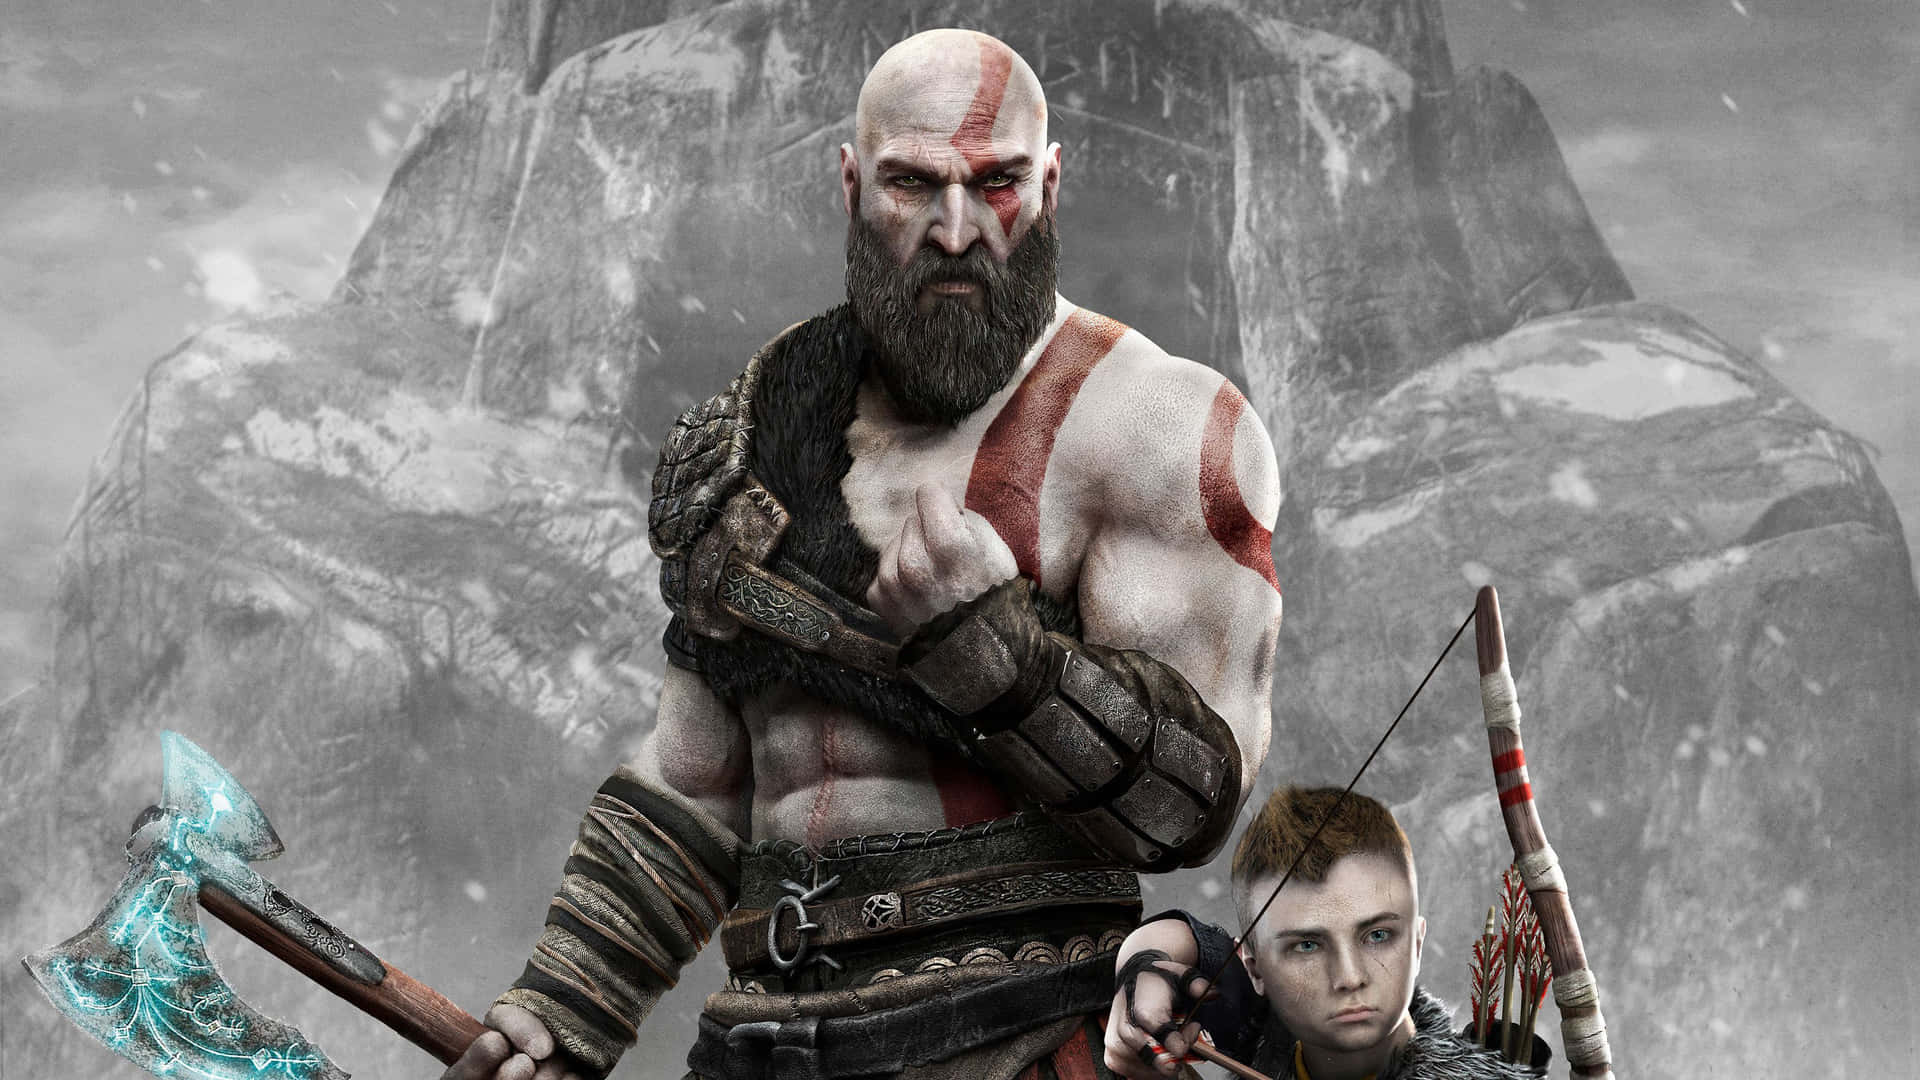 Kratos Takes The Fight To New Worlds In God Of War 5 Wallpaper